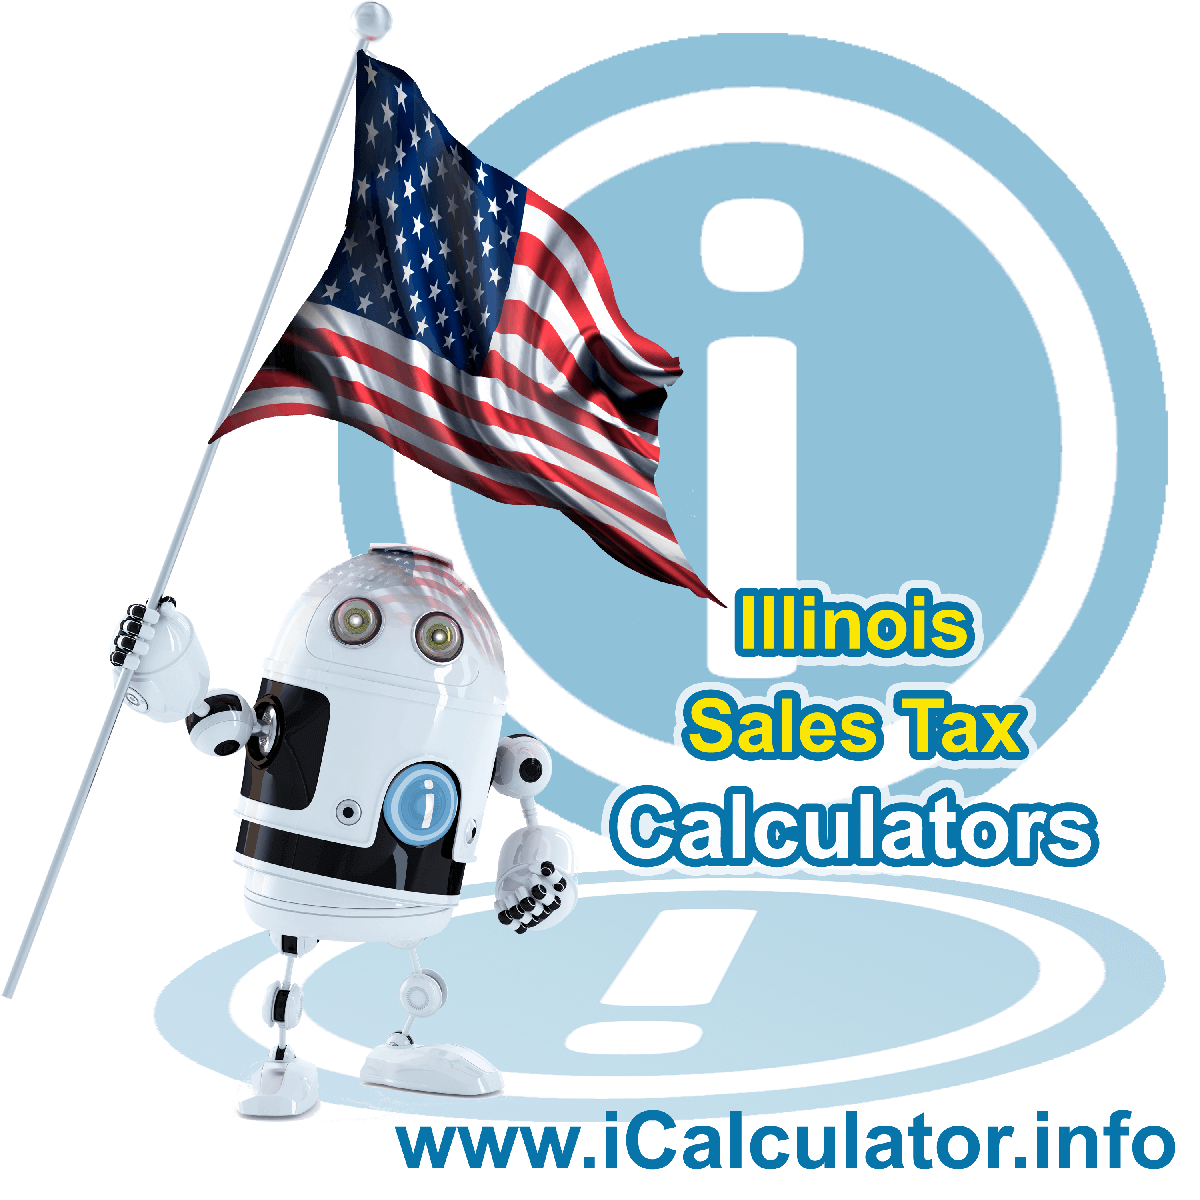 Tinley Park Sales Rates: This image illustrates a calculator robot calculating Tinley Park sales tax manually using the Tinley Park Sales Tax Formula. You can use this information to calculate Tinley Park Sales Tax manually or use the Tinley Park Sales Tax Calculator to calculate sales tax online.